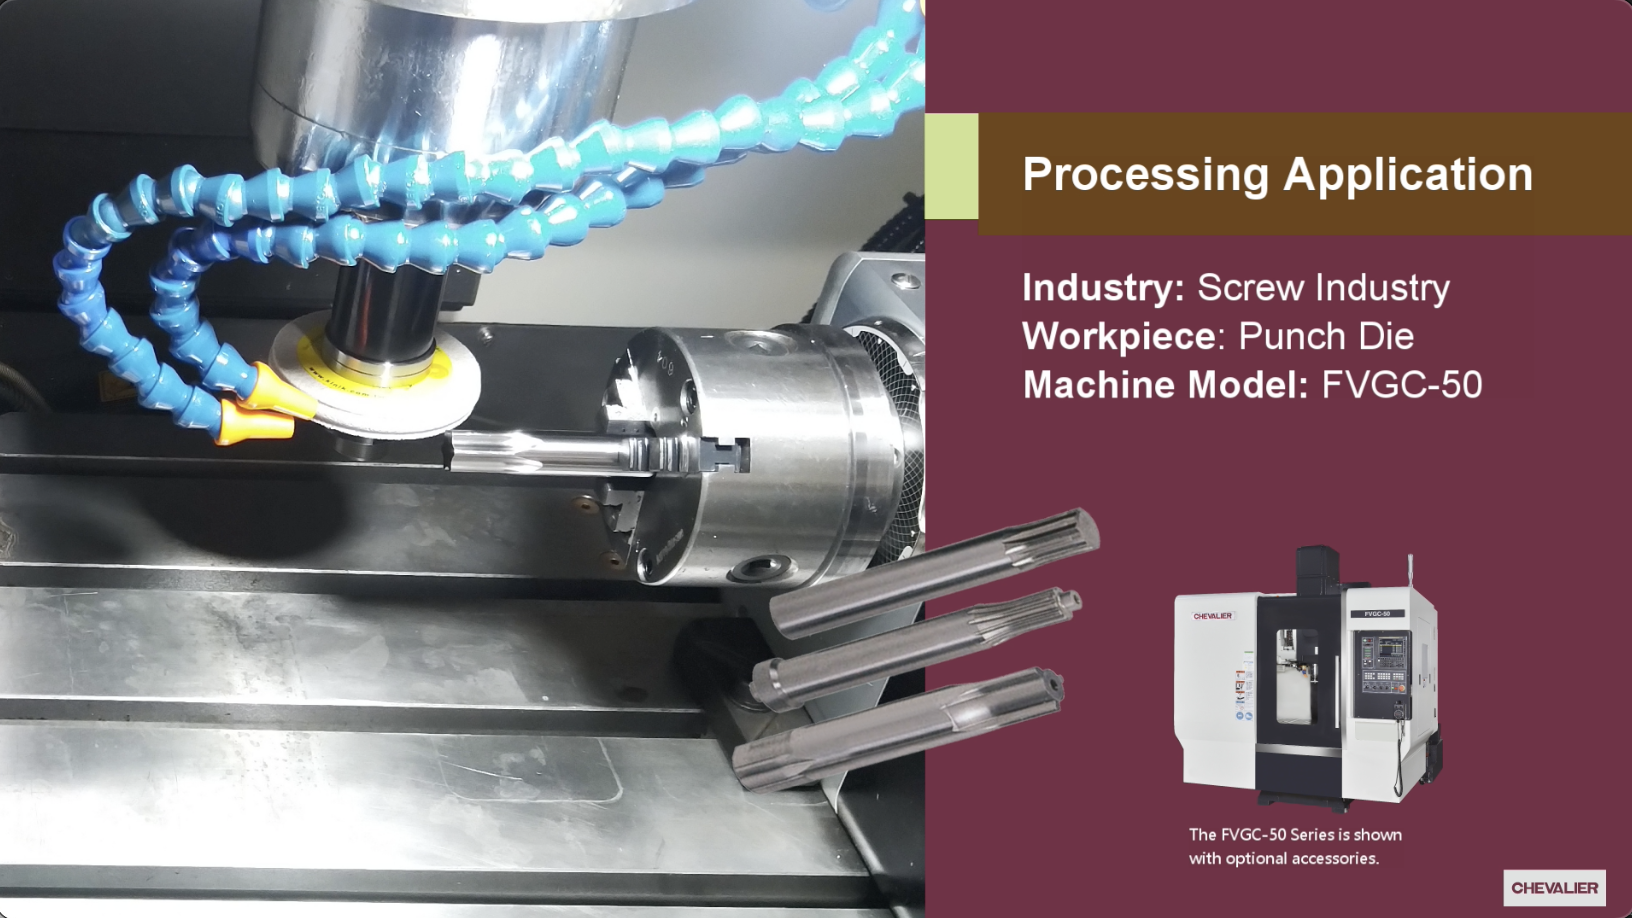 Screw Industry│Punch Die Processing Application_FVGC-50